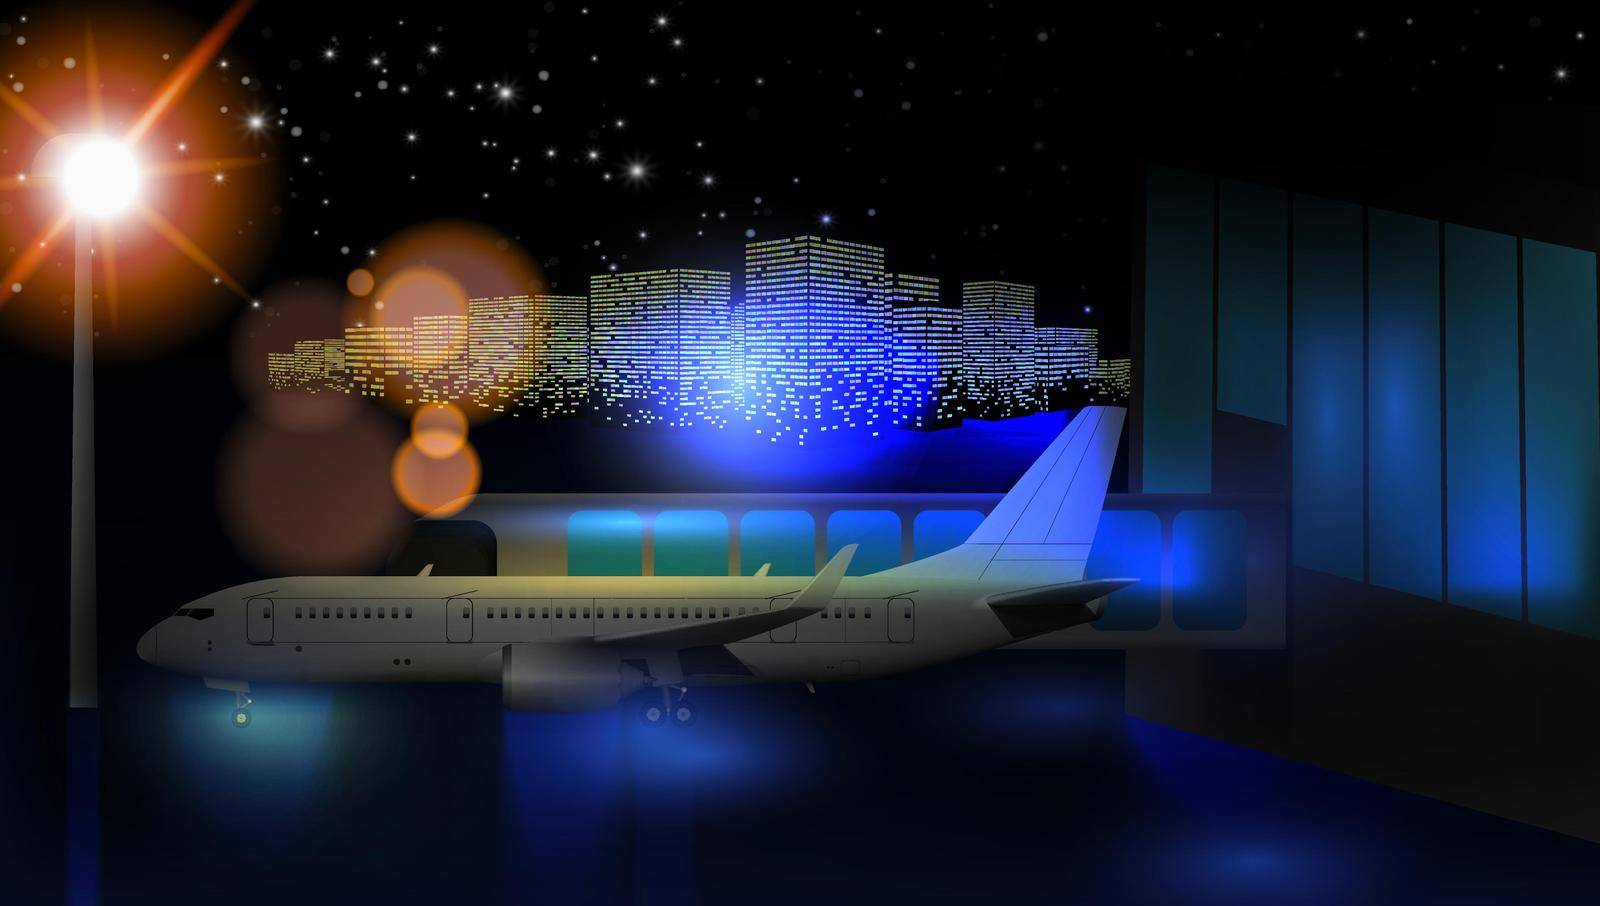 Night View Of The Airport Passenger Terminal by VectorThings